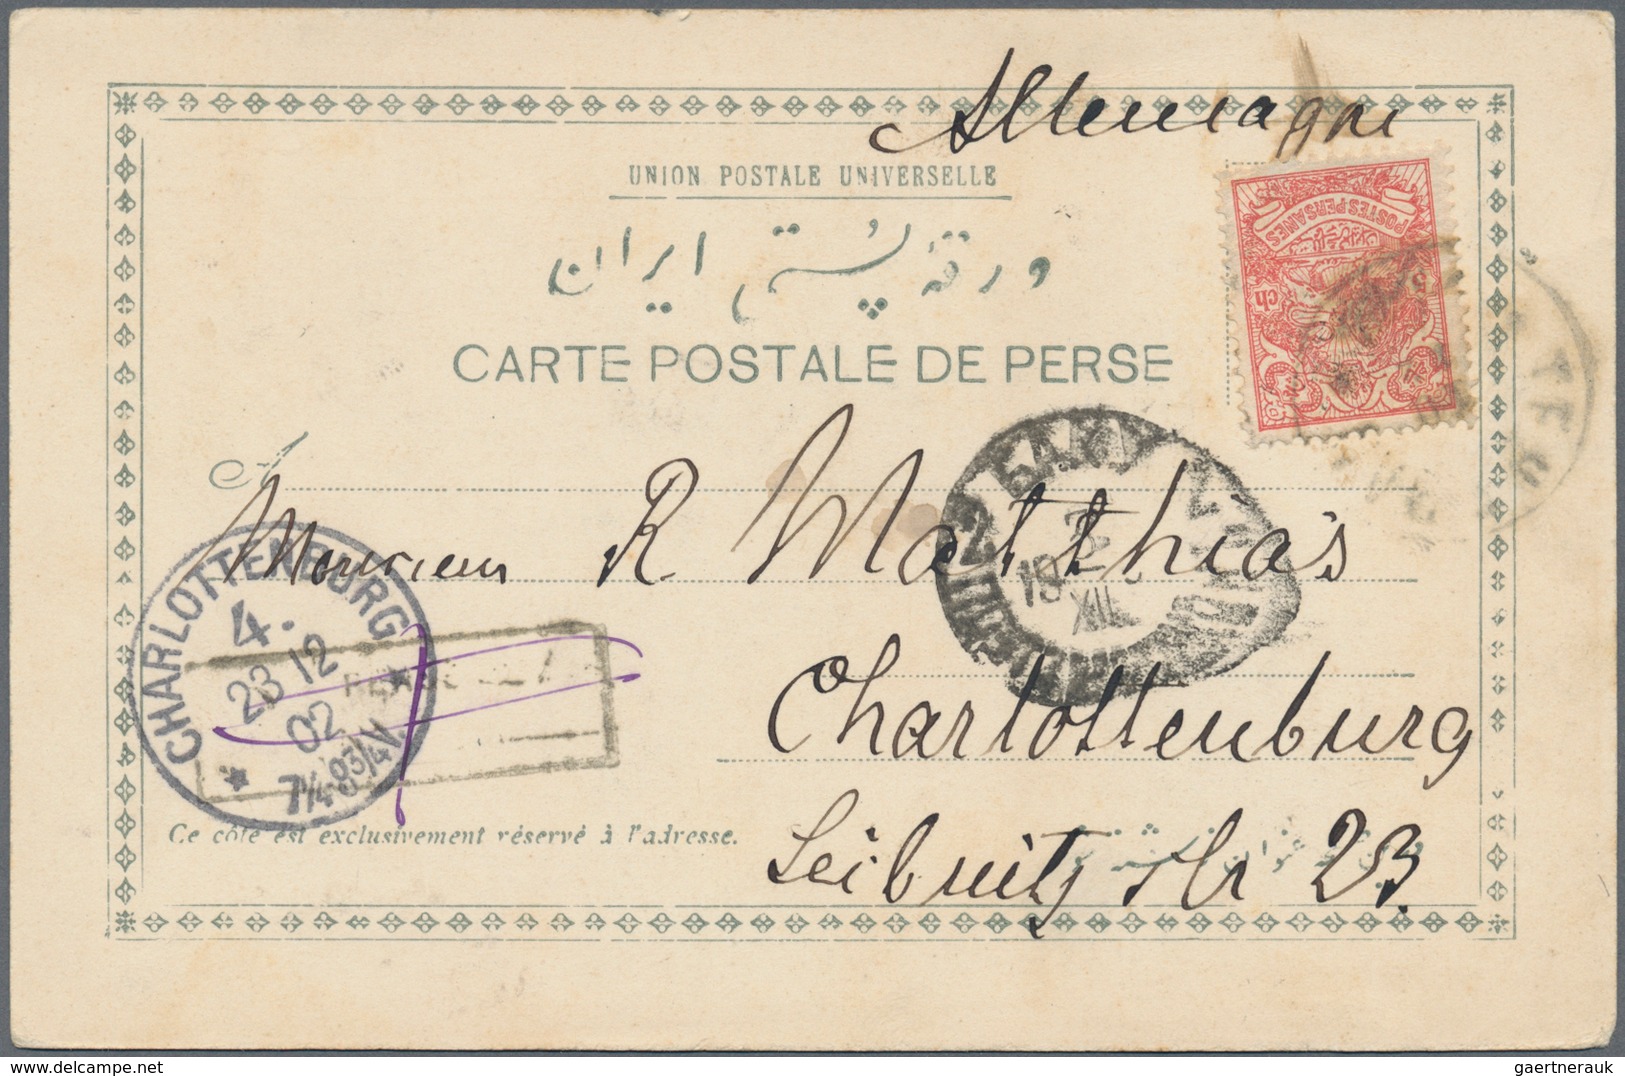 Iran: 1891/1908, group of nine entires (covers, ppc and used stationeries with comprehensive message